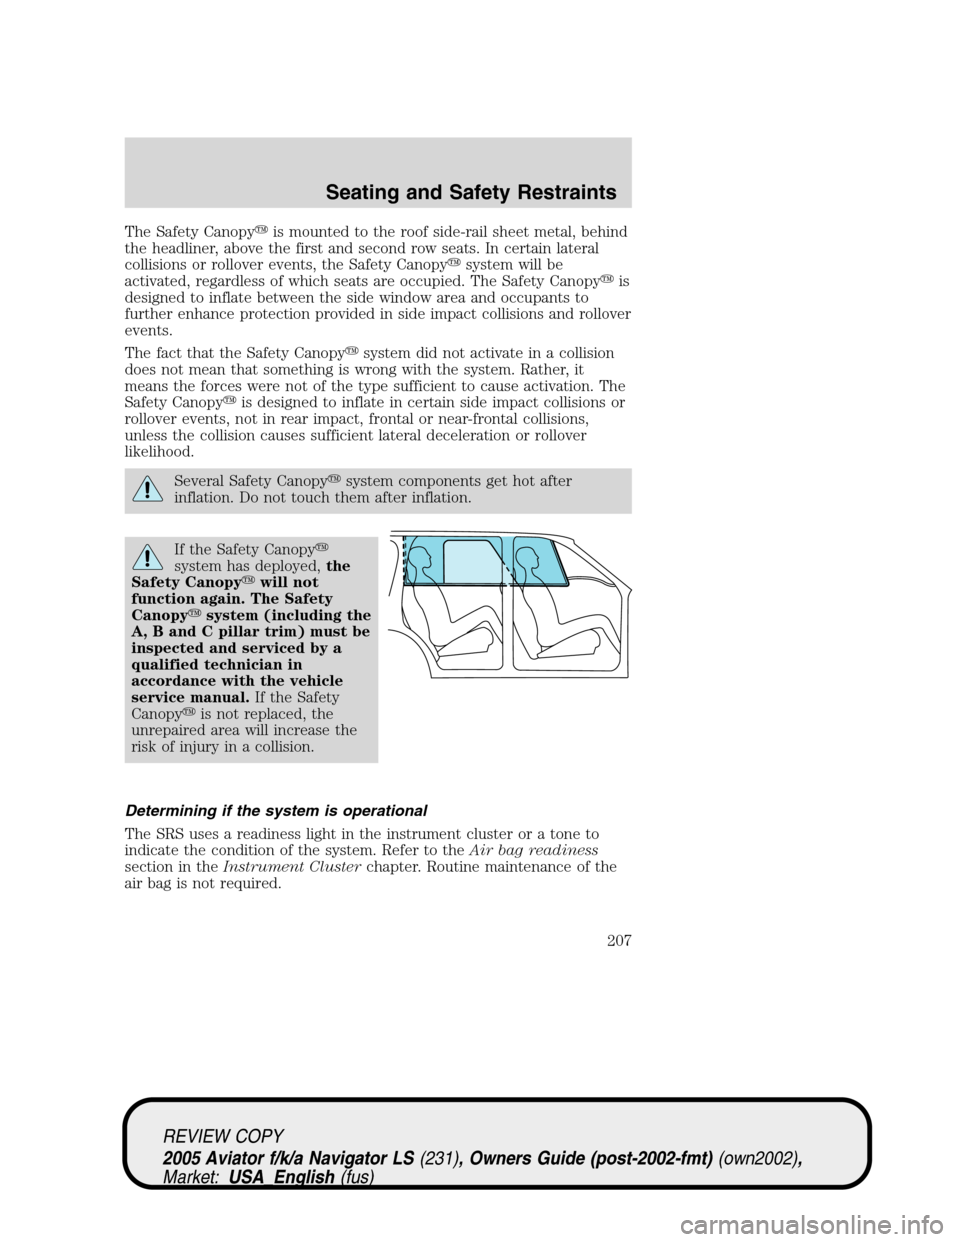 LINCOLN AVIATOR 2005 User Guide The Safety Canopyis mounted to the roof side-rail sheet metal, behind
the headliner, above the first and second row seats. In certain lateral
collisions or rollover events, the Safety Canopysystem w